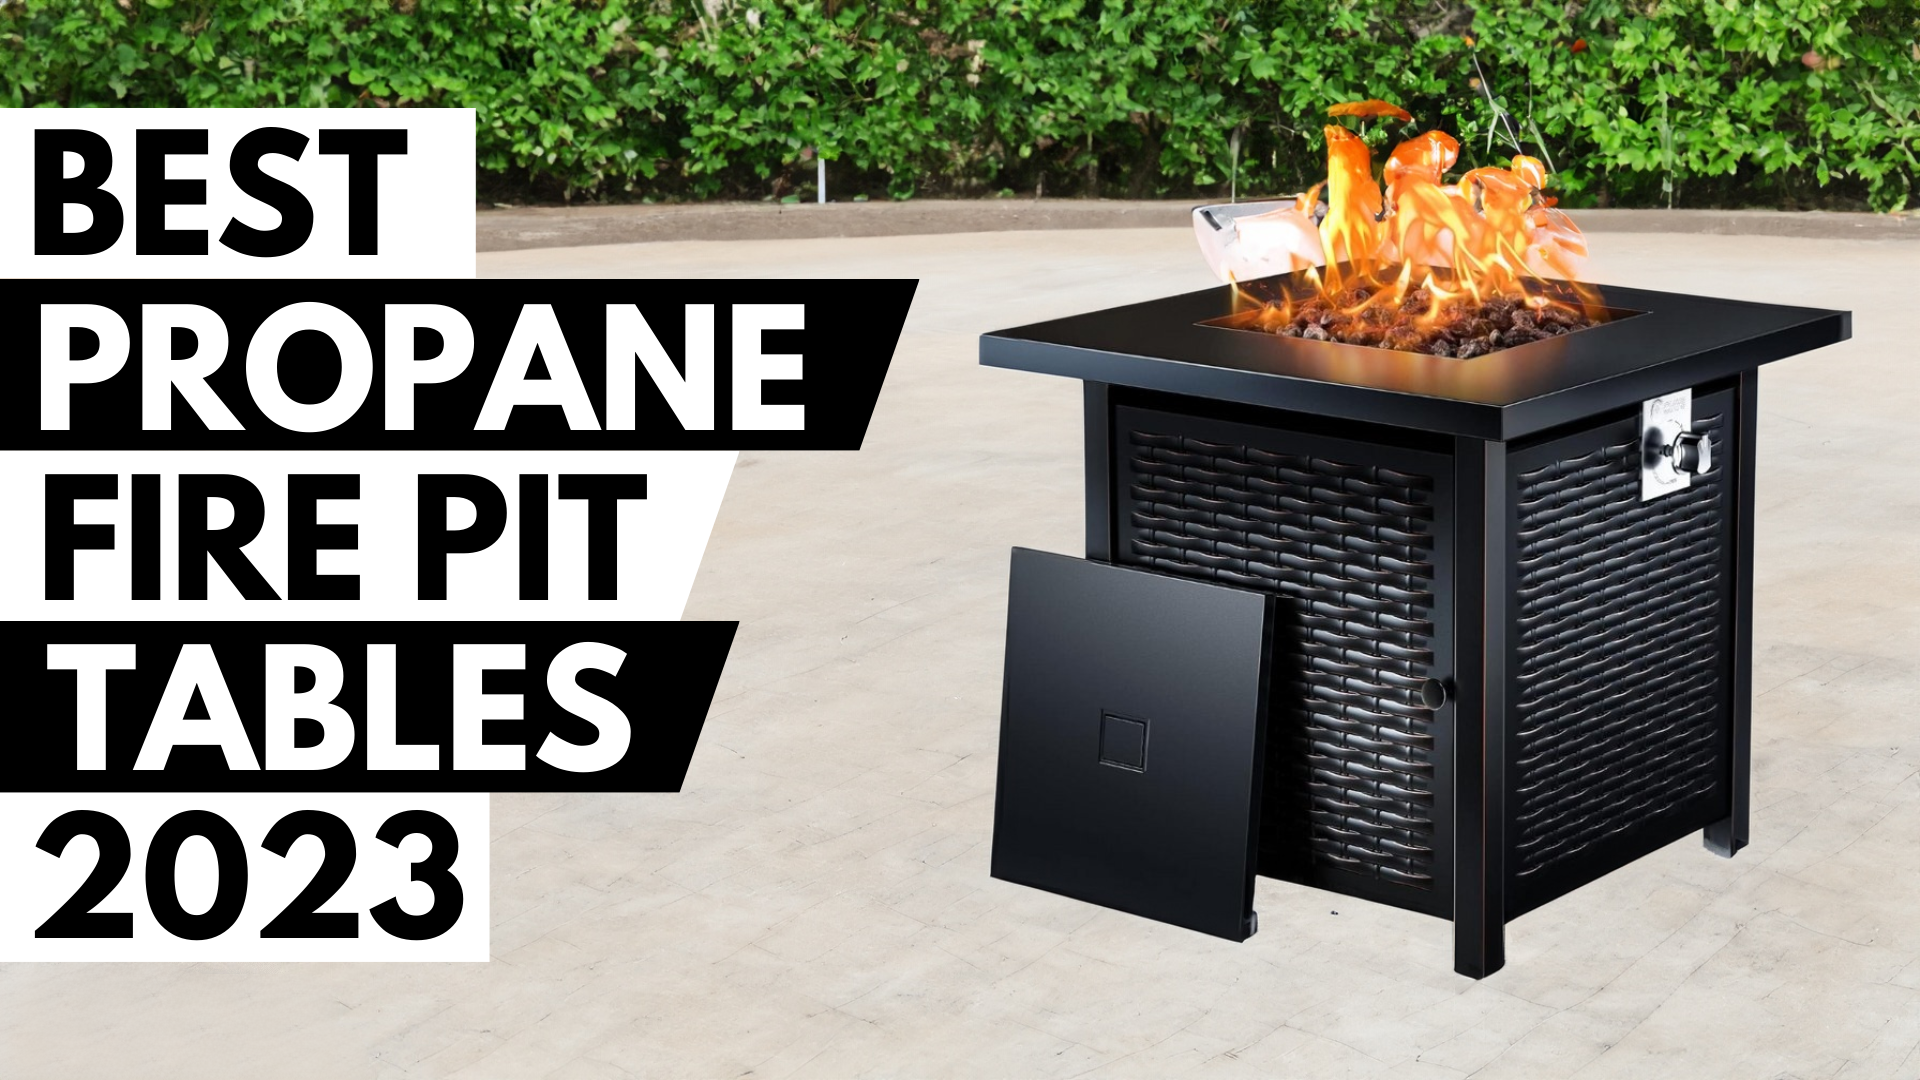 Best Propane Fire Pit tables 2023